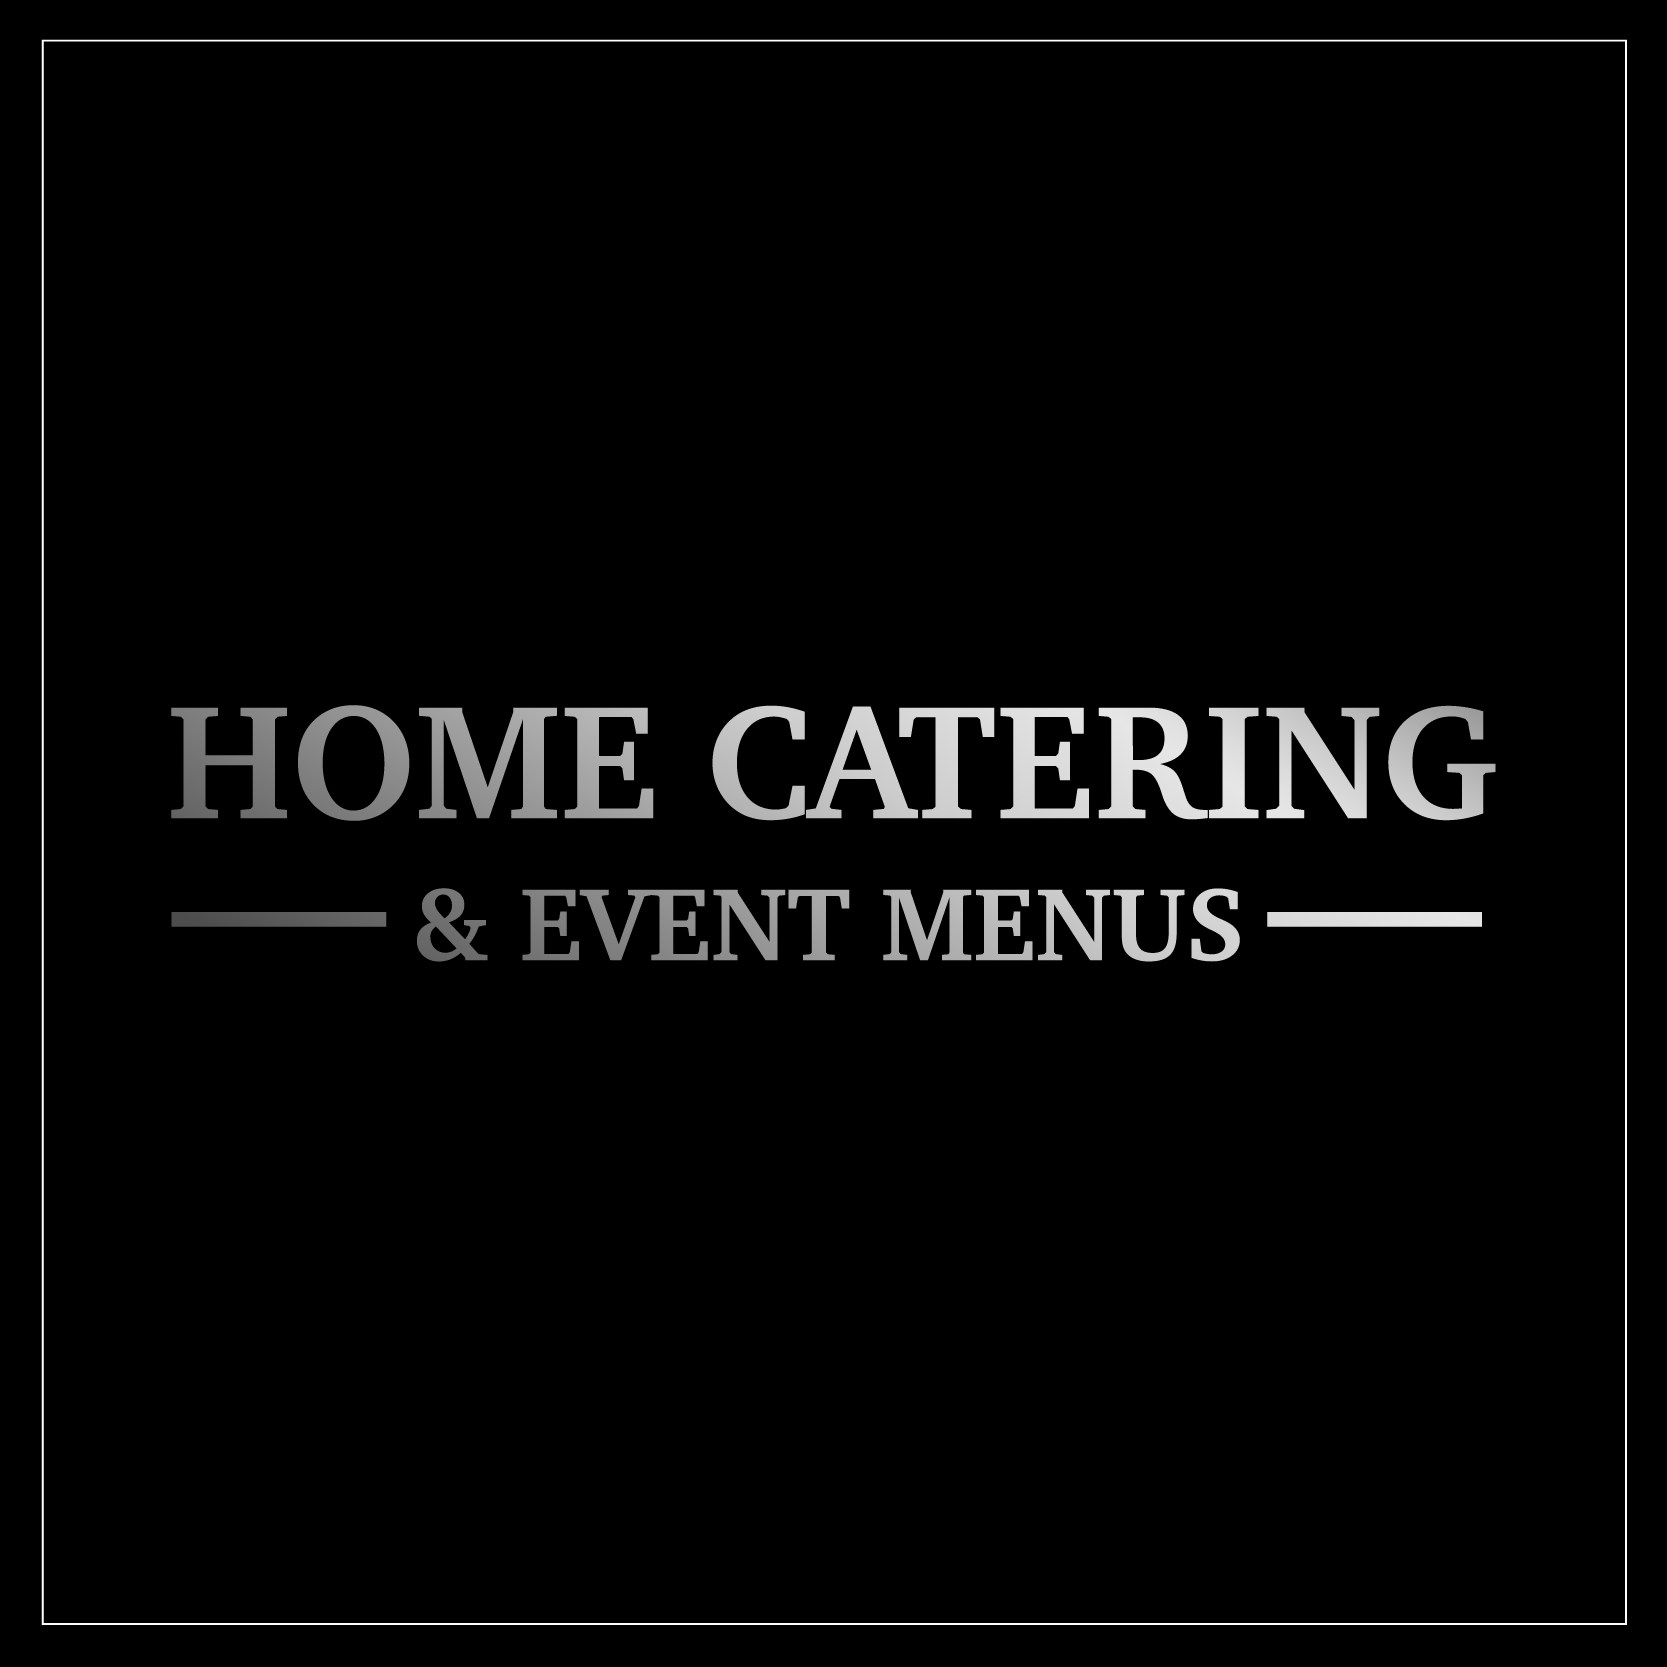 At Home Catering Experience